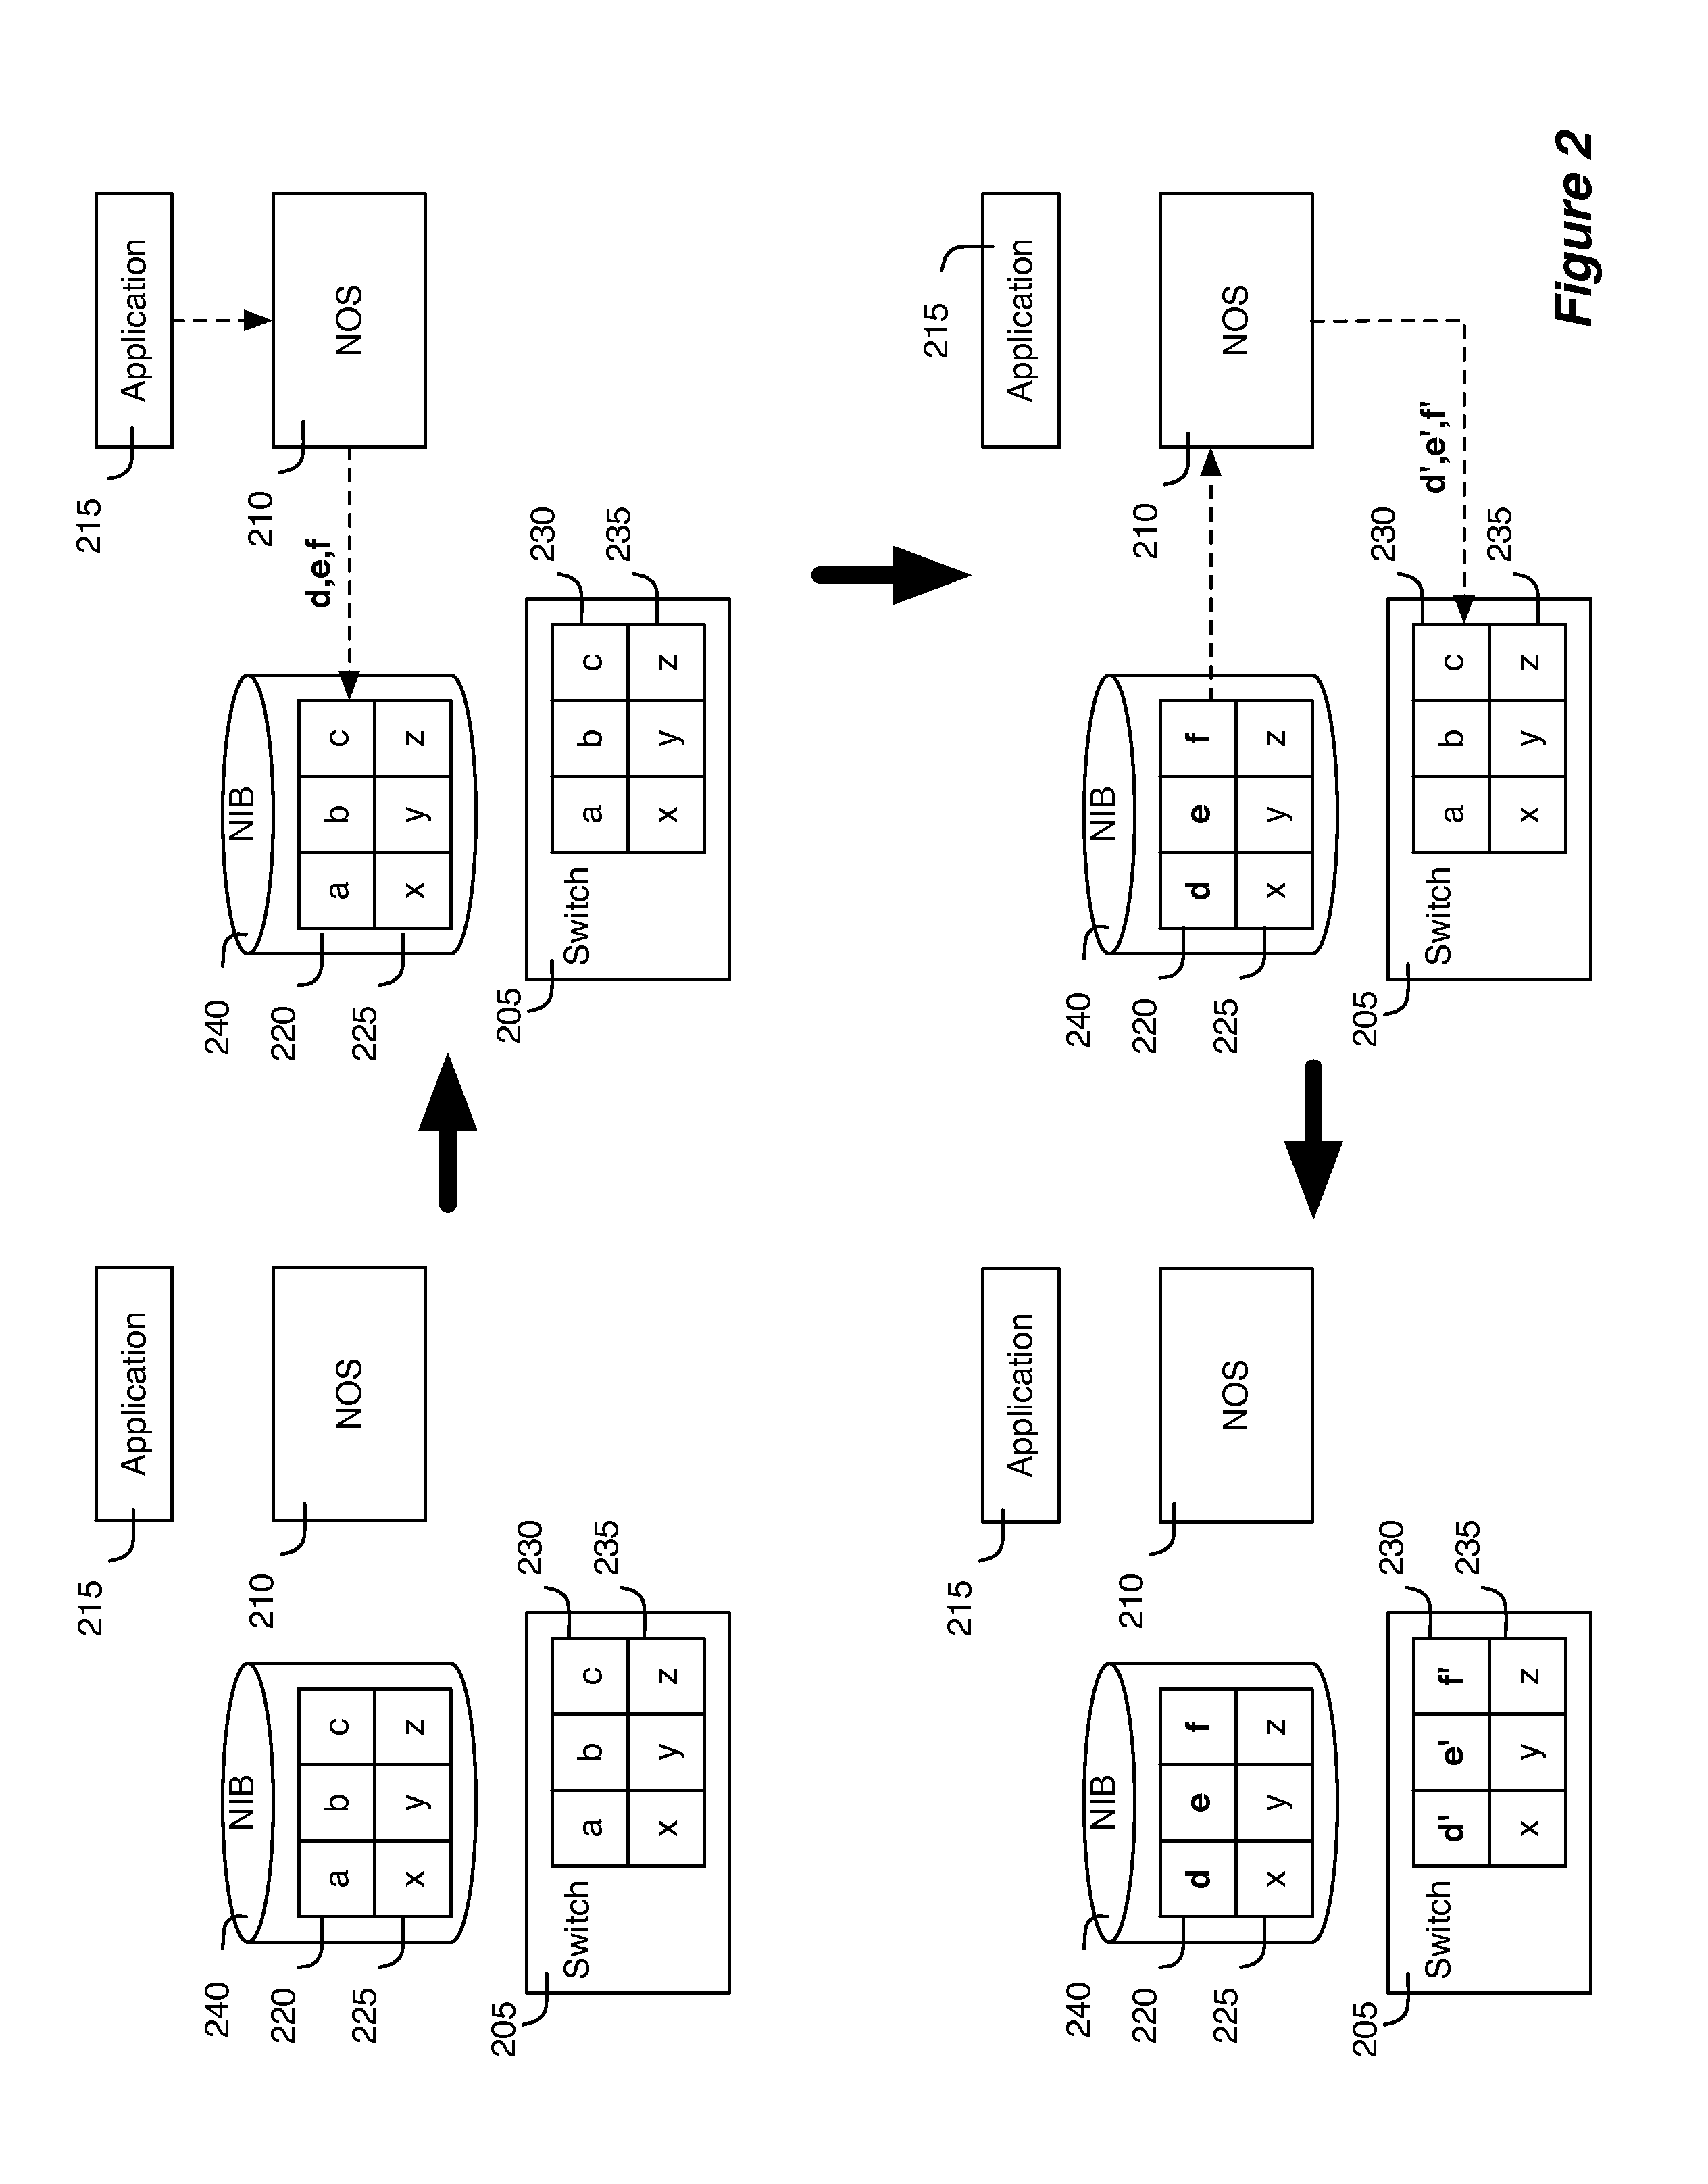 Network control apparatus and method for port isolation